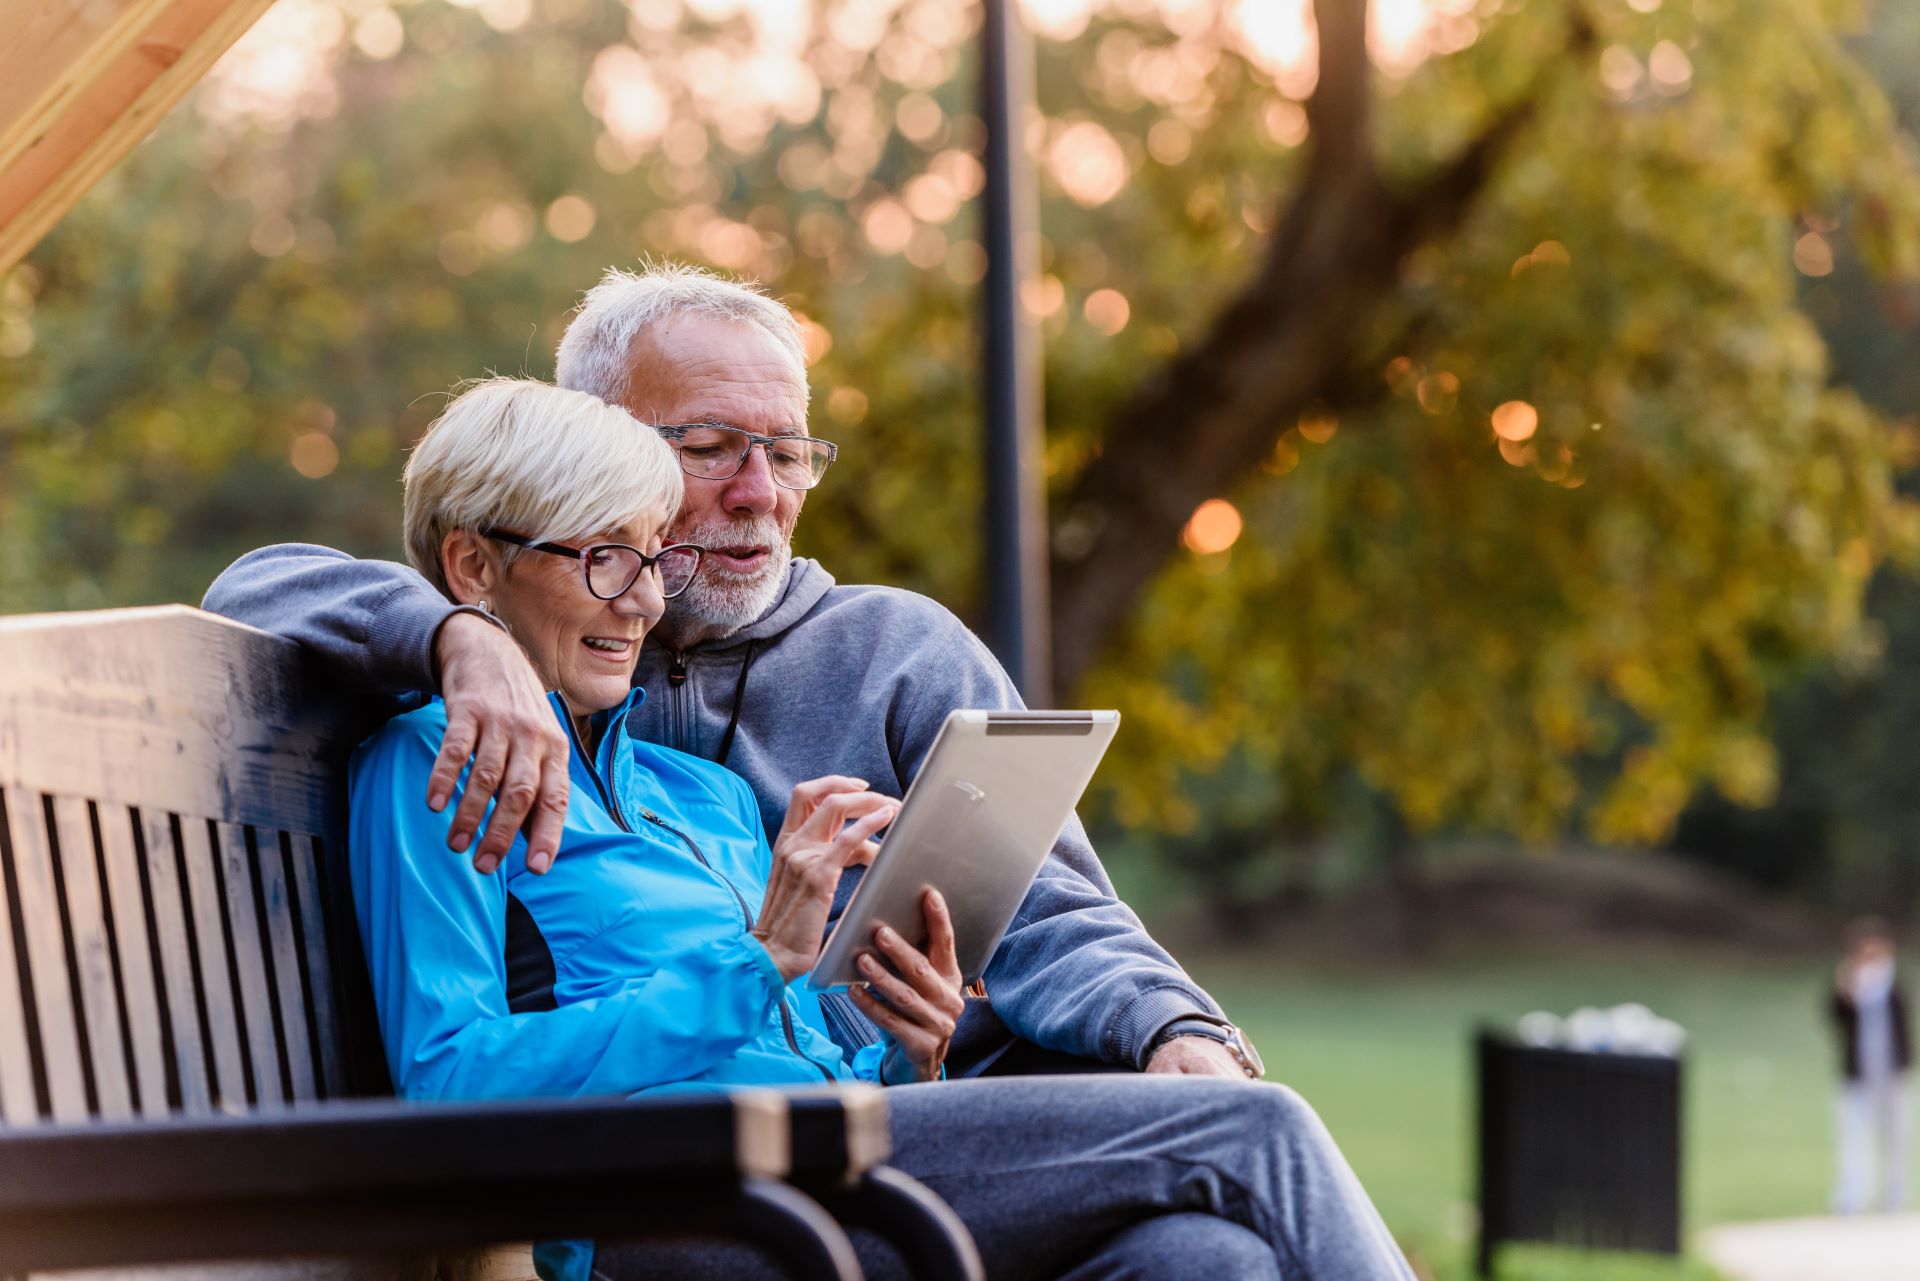 An older couple sits together reading on a park bench outdoors